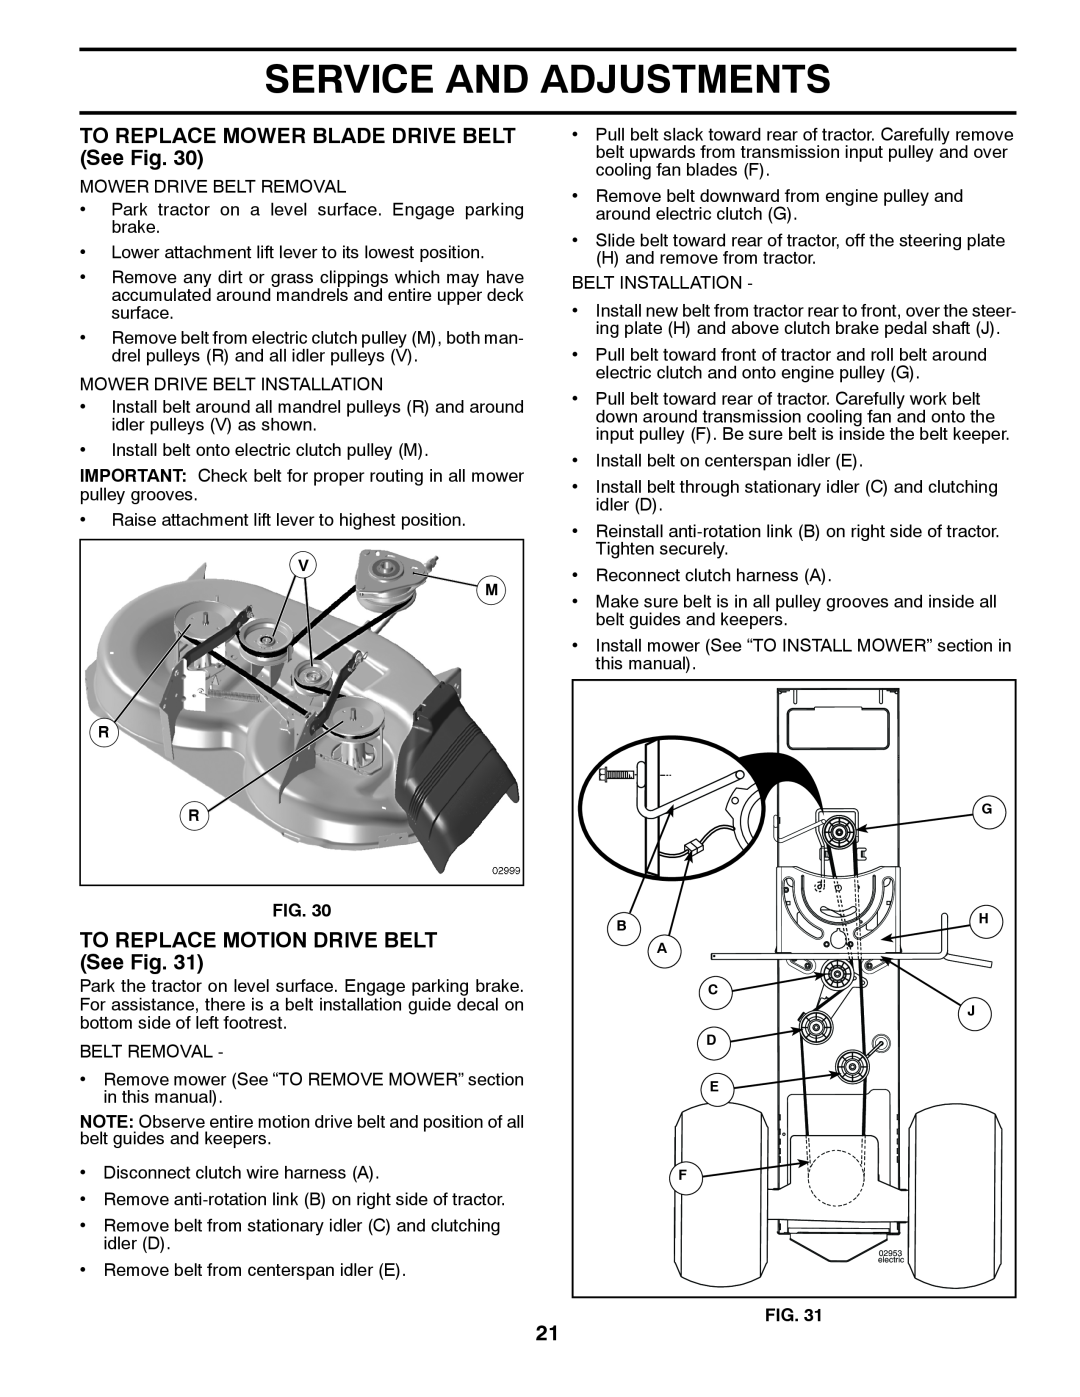 Husqvarna 2146XLS TO REPLACE MOWER BLADE DRIVE BELT See Fig, TO REPLACE MOTION DRIVE BELT See Fig, Service And Adjustments 